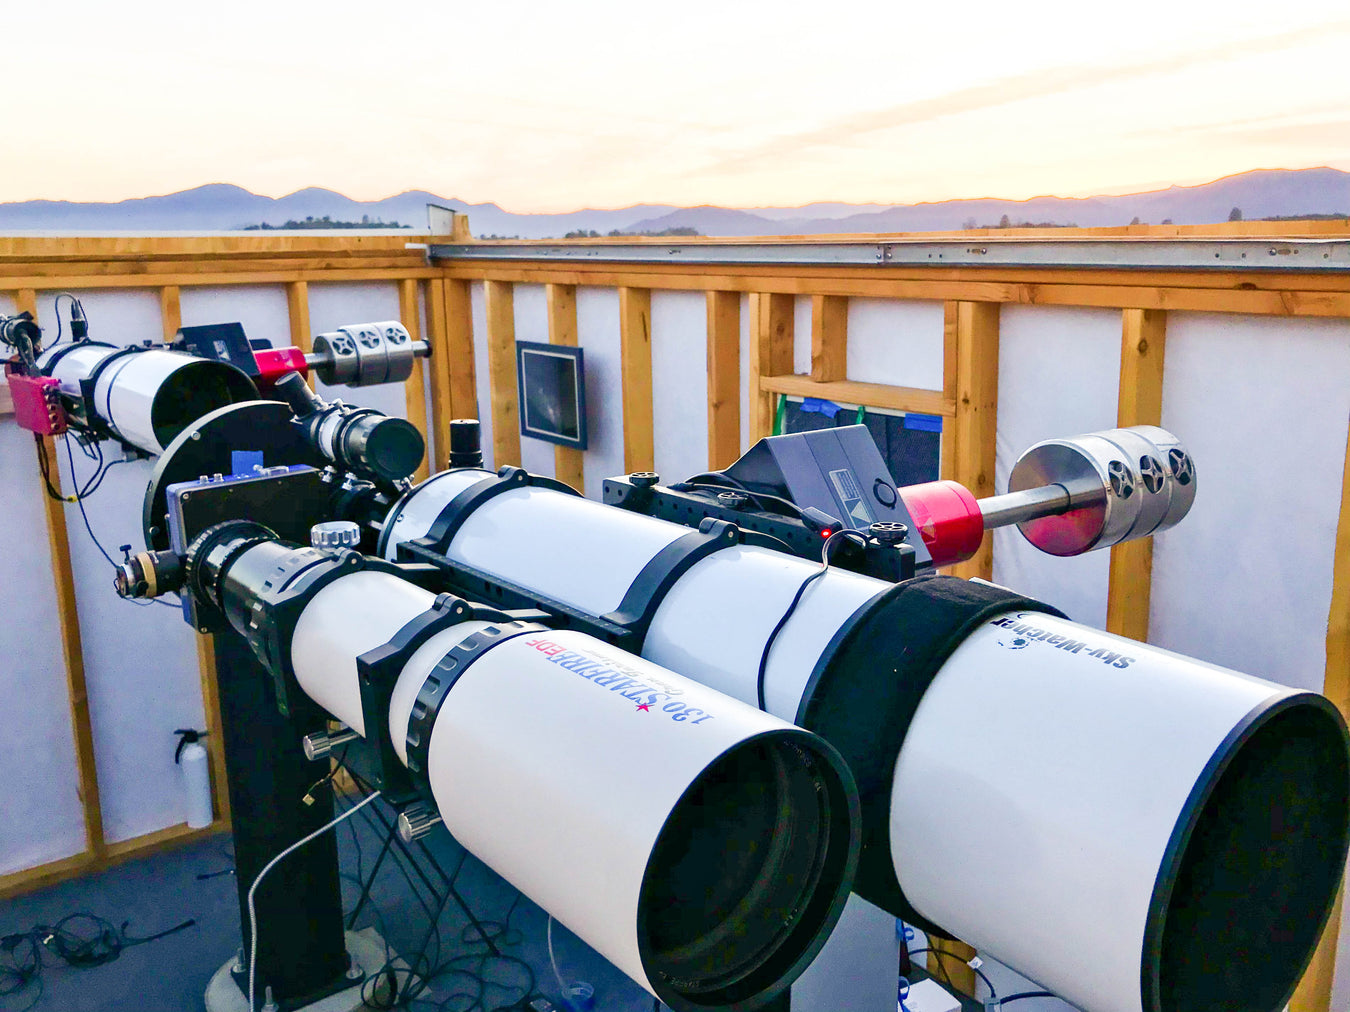 The Making of a Remote Site: An Interview with Bryan Cogdell of Falling Eagle Observatory